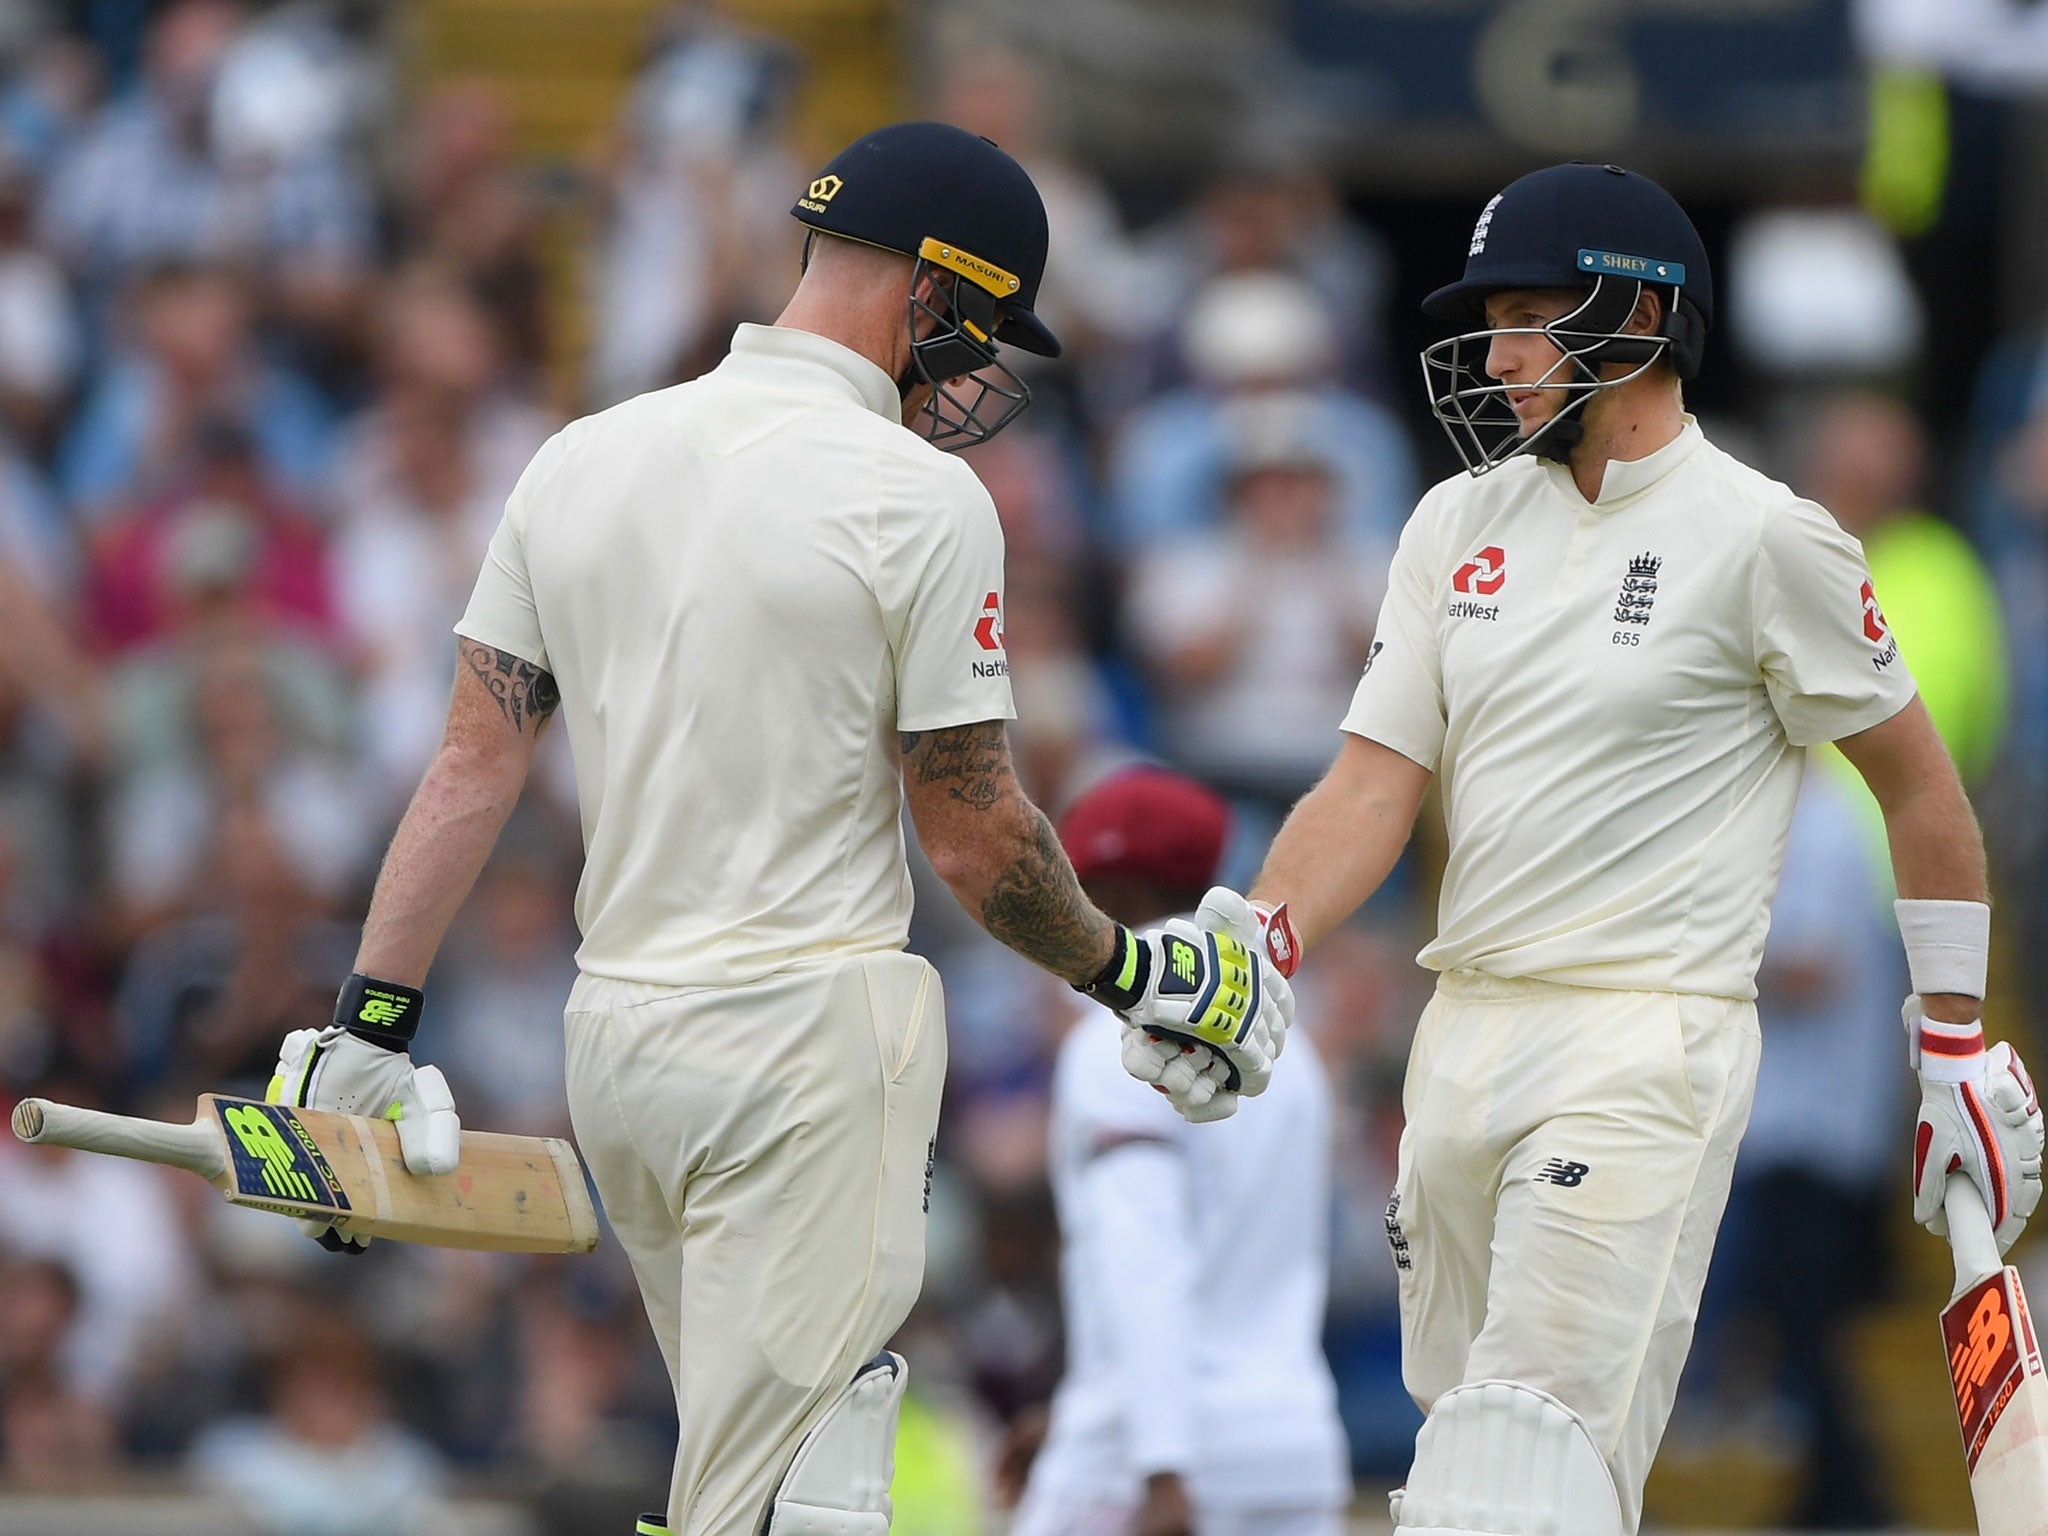 Joe Root is congratulated by Ben Stokes after reaching his 50